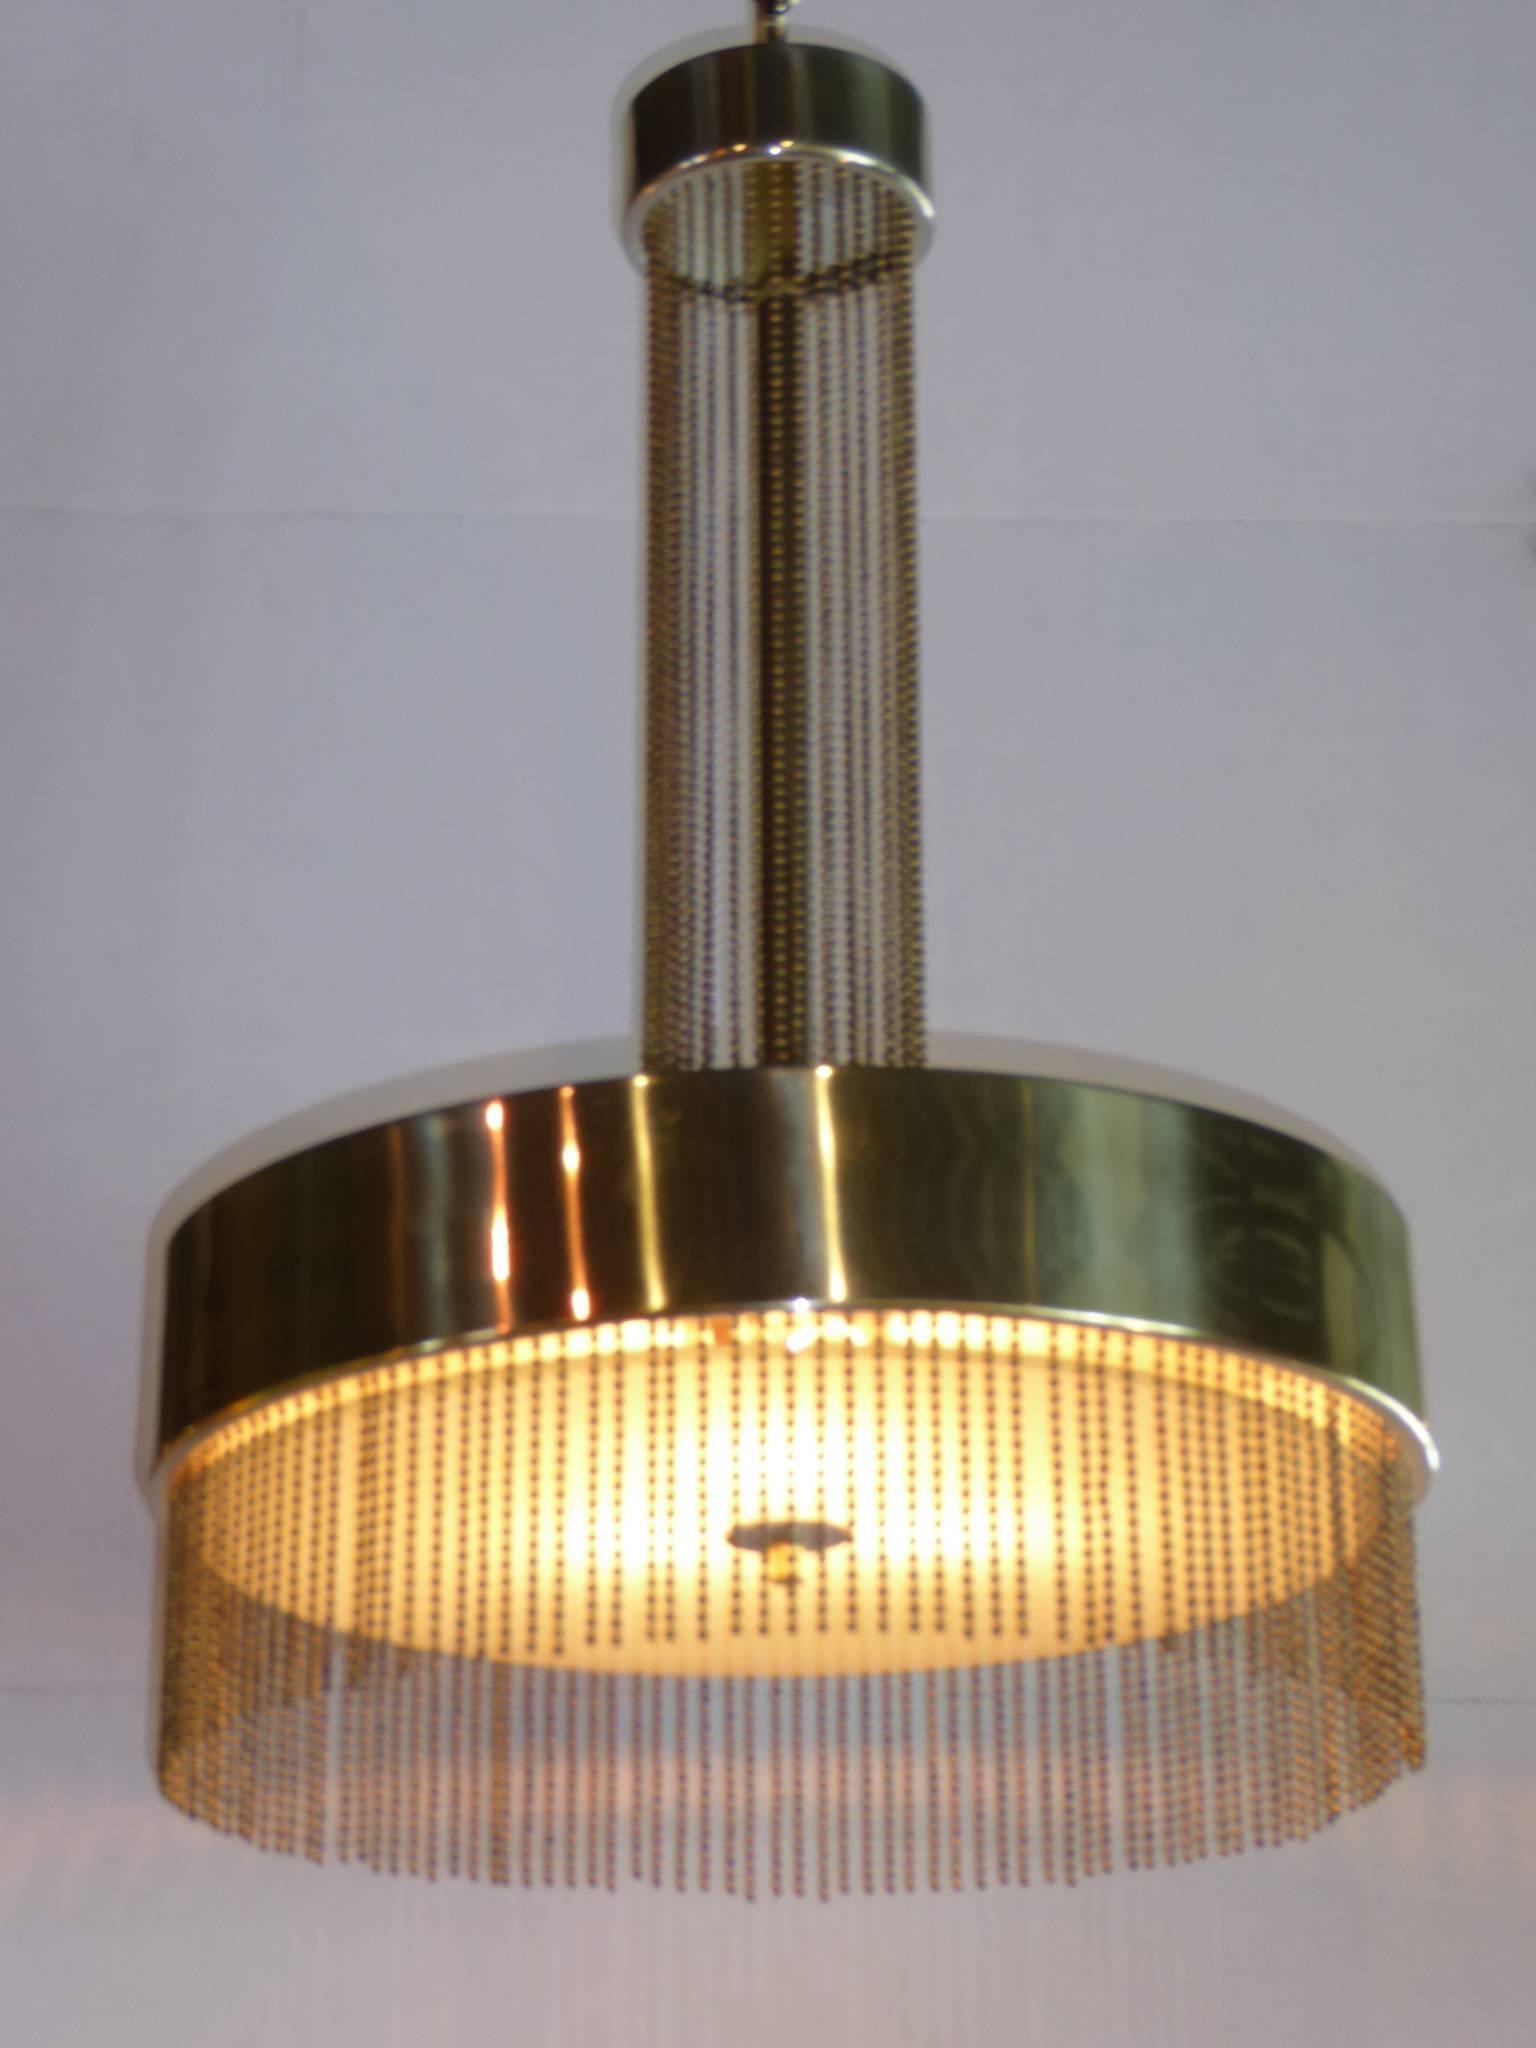 Like a champagne fountain, this Pierre Cardin chandelier is sophisticated and intoxicating with its brass tiers joined by brass bead strands. With three sockets under a center circular glass. Rewired with 36" extra wire to allow for lengthening